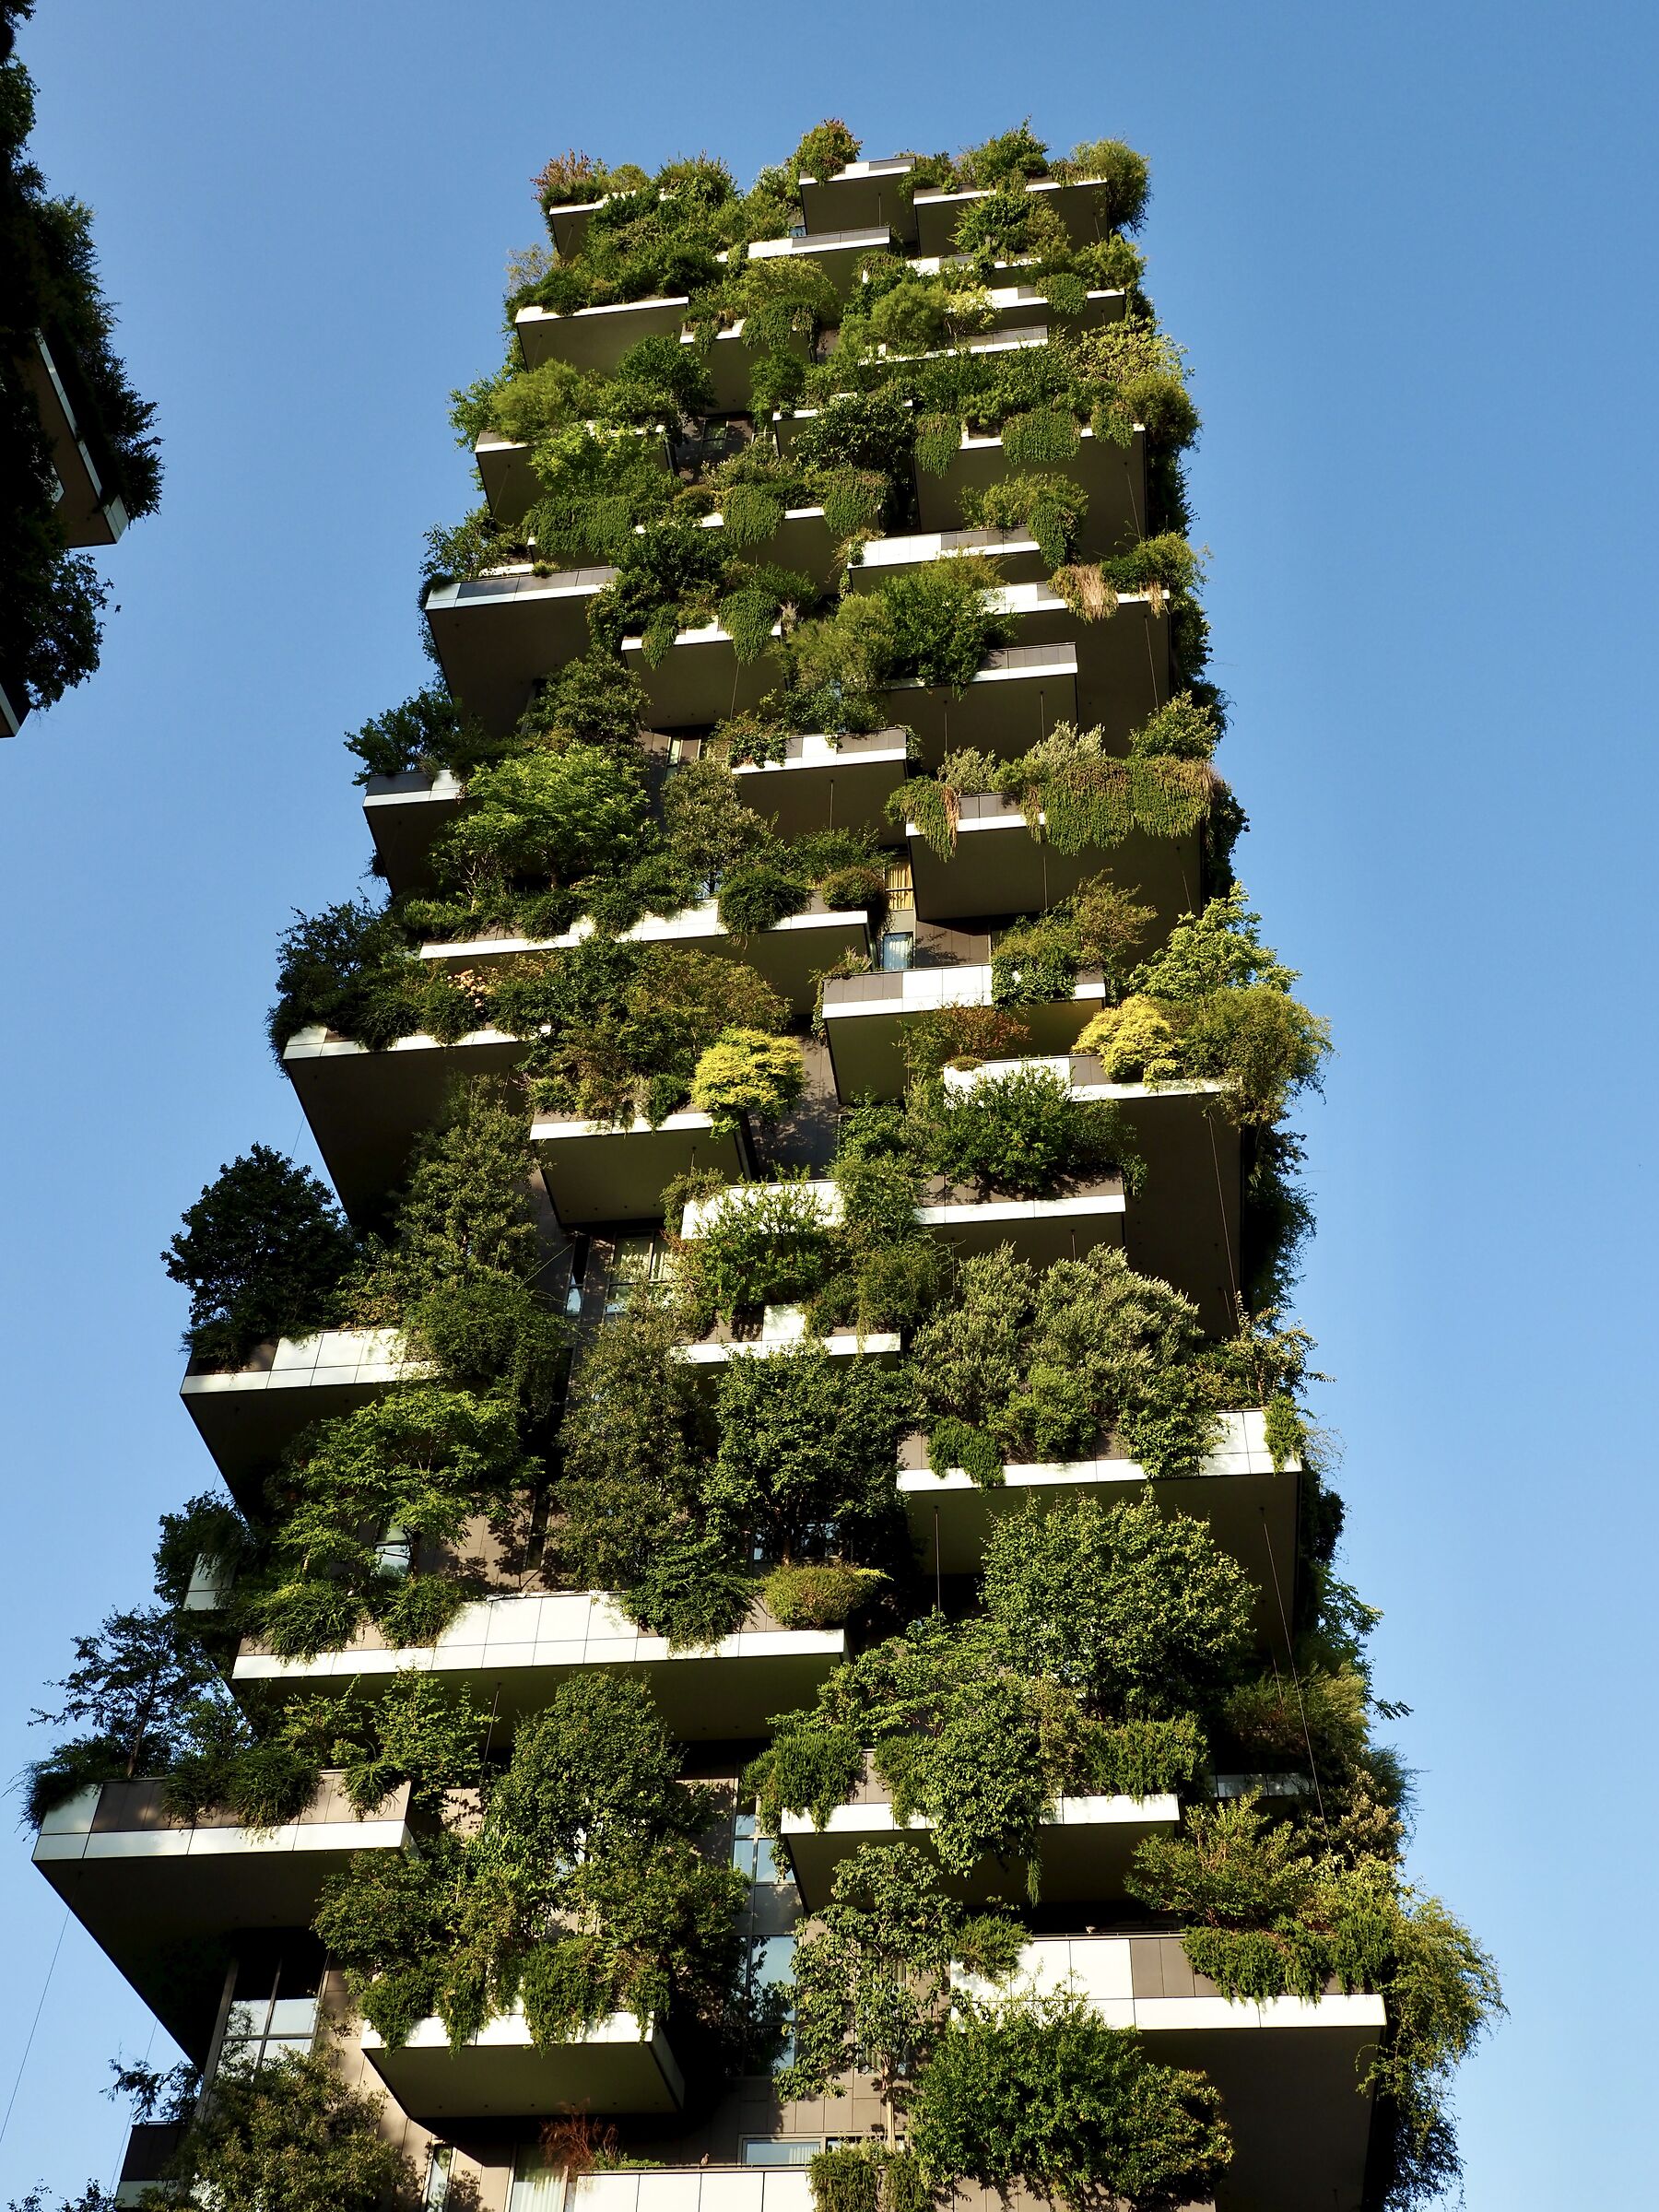 The beauty of the Vertical Forest ...